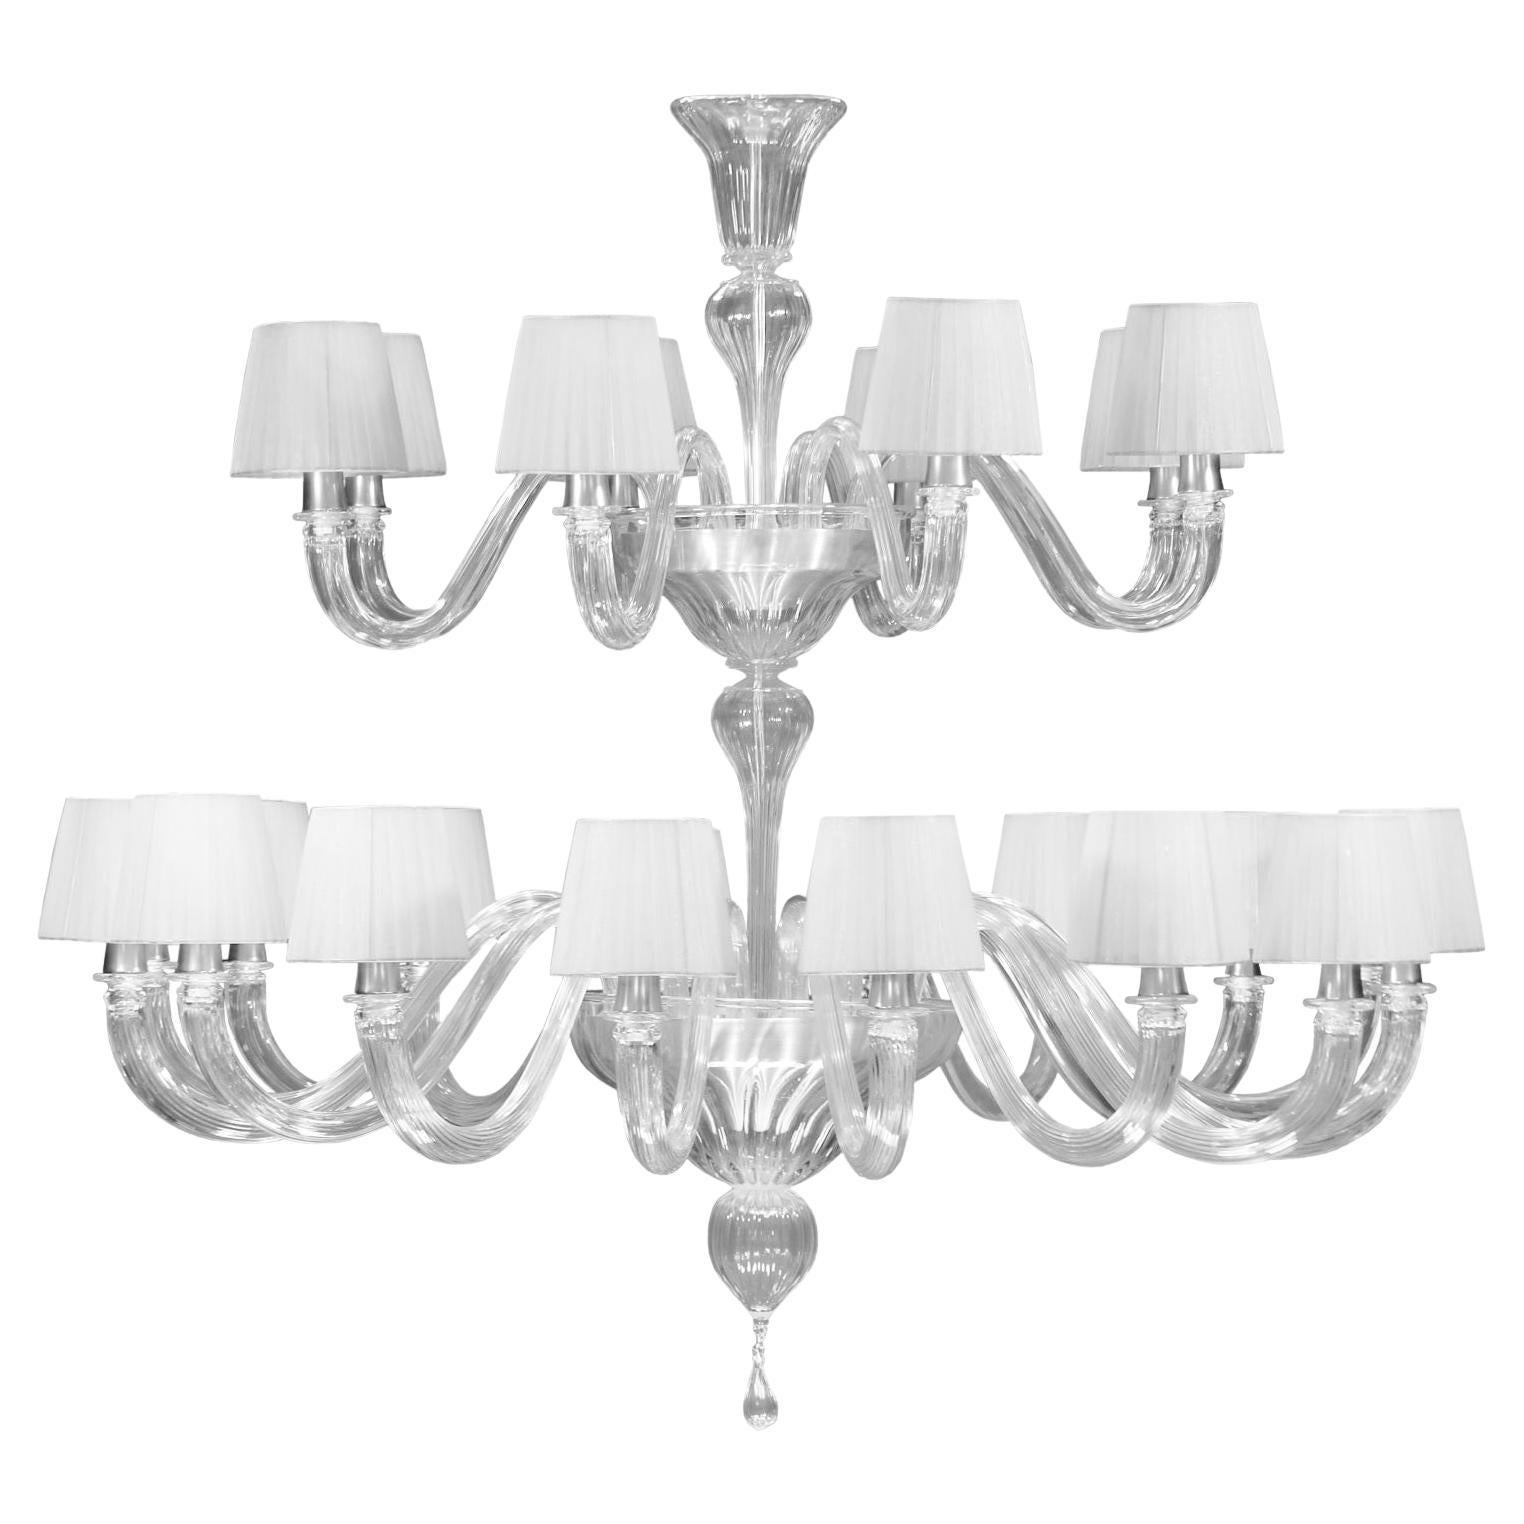 Chandelier 16+8 Arms Crystal Murano Glass Handmade Lampshades by Multiforme For Sale